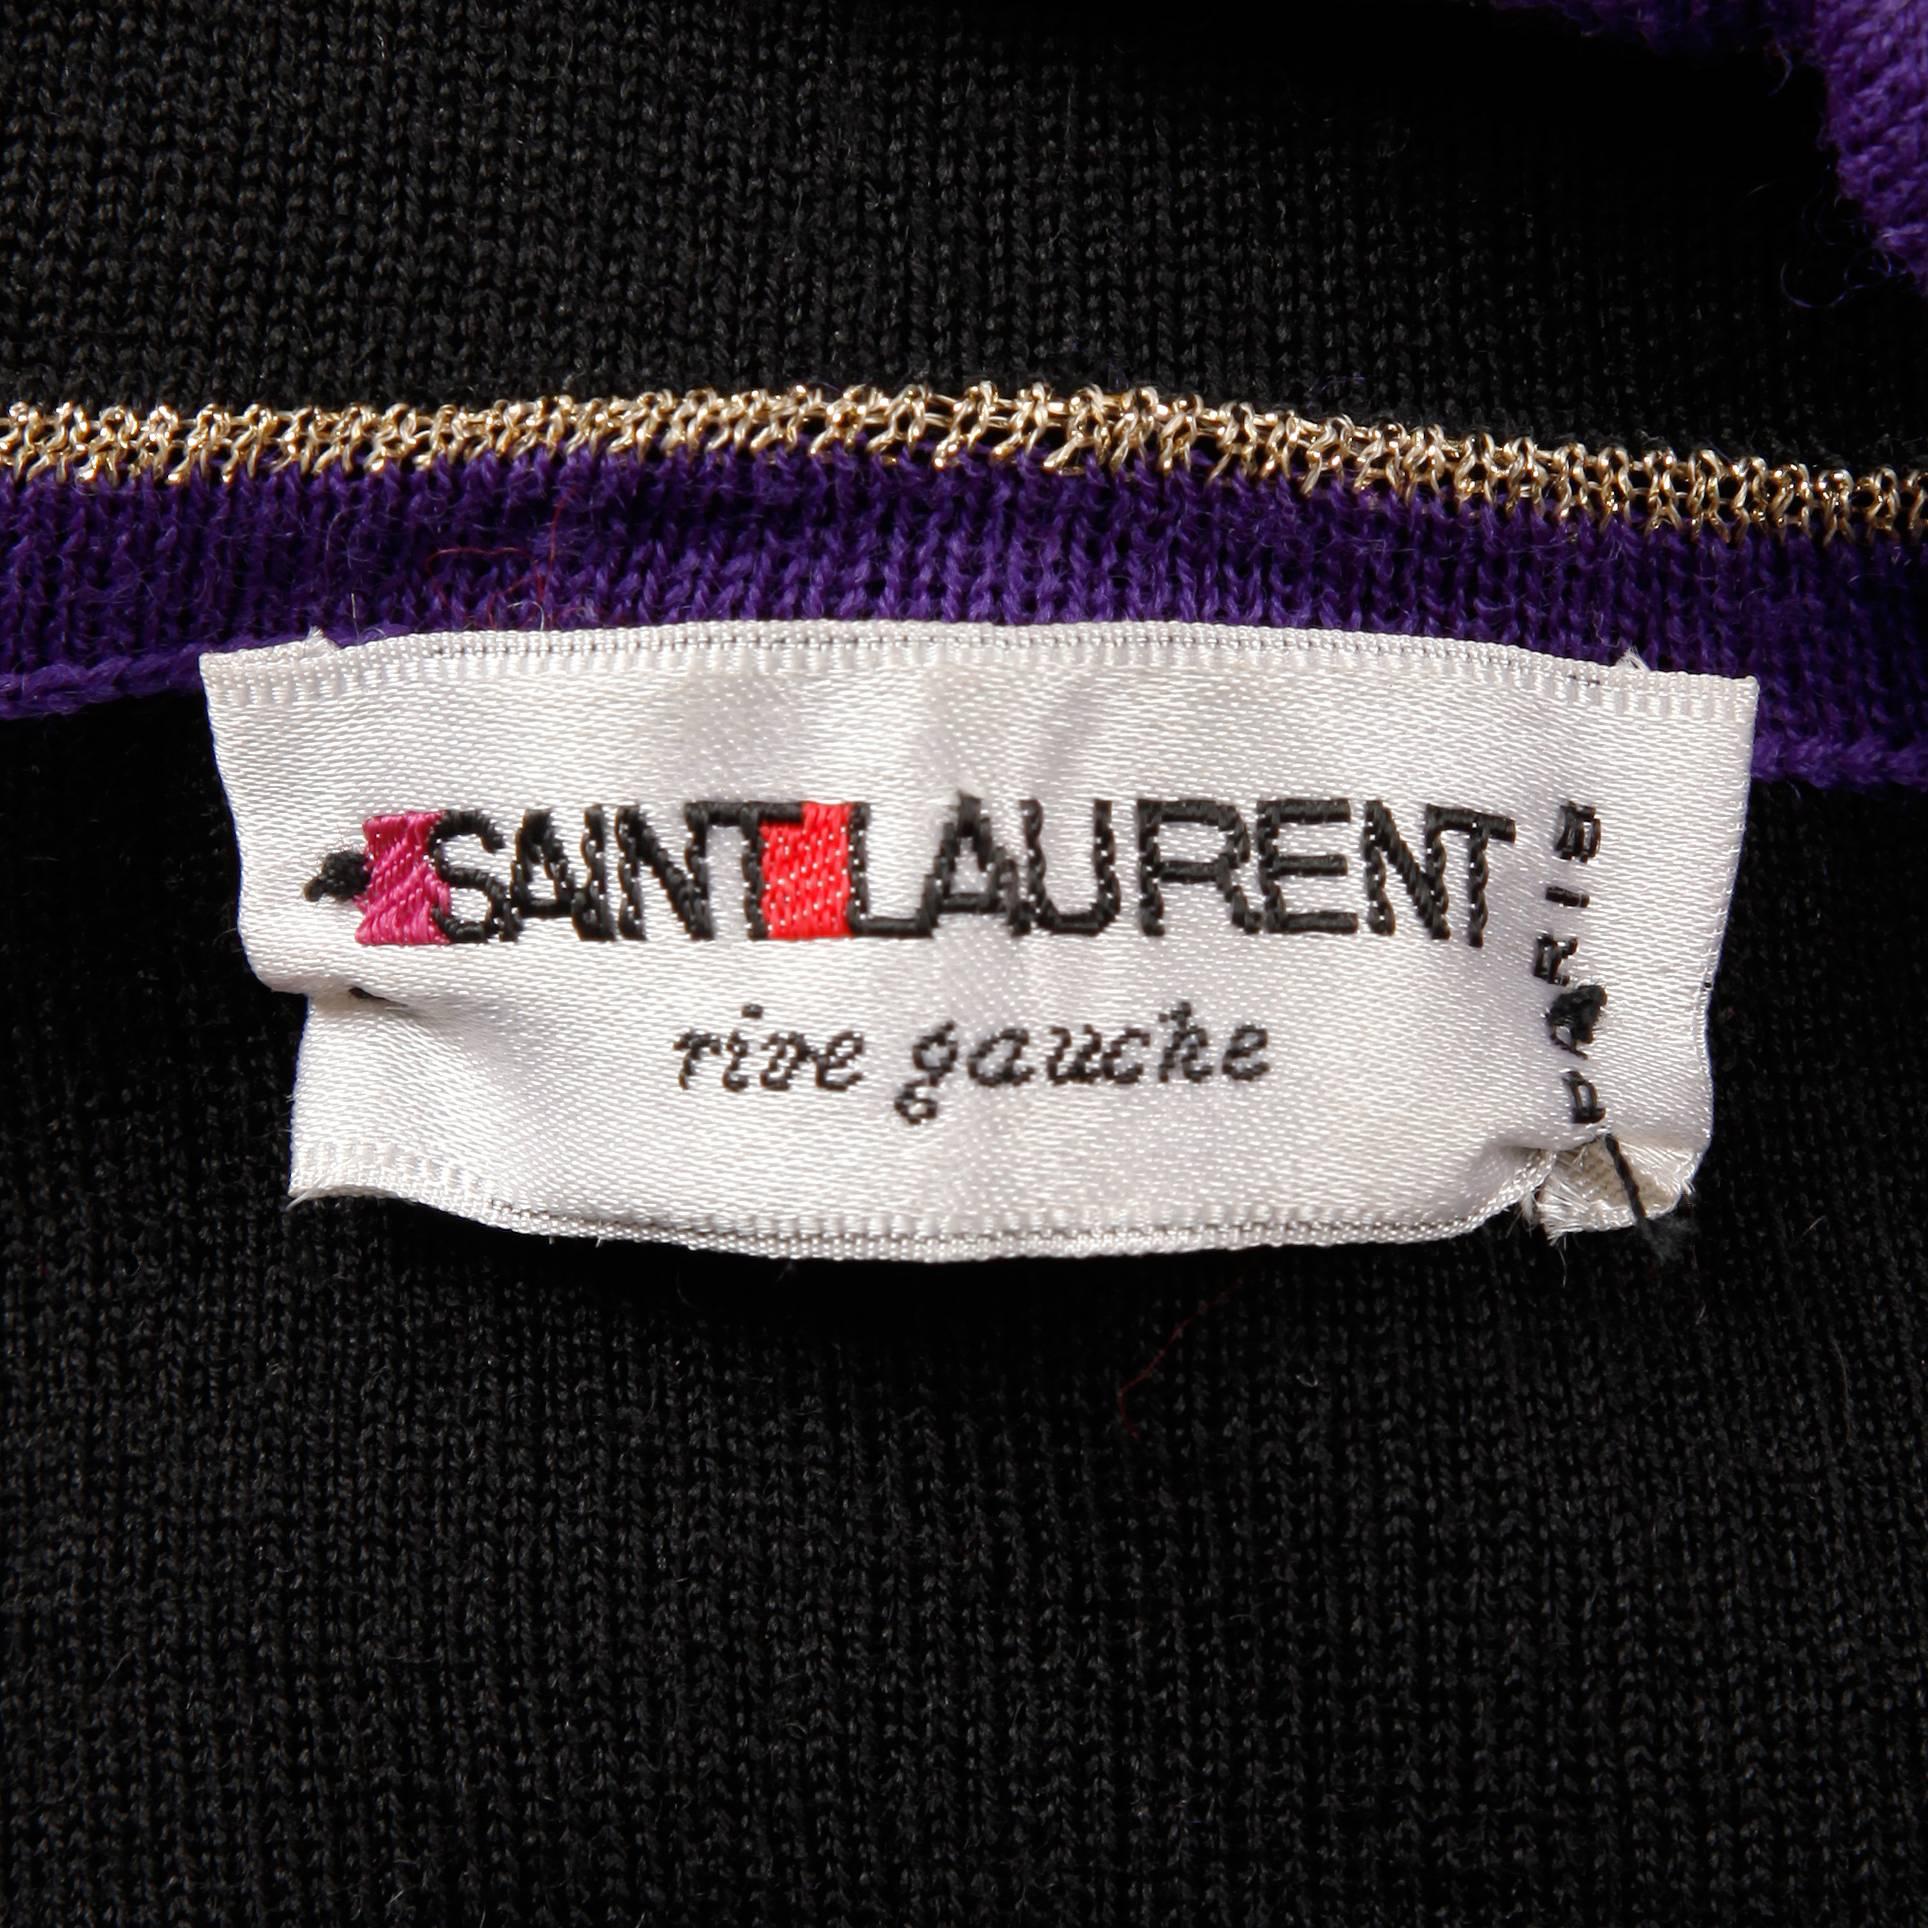 Vintage 1970s Yves Saint Laurent knit wrap sweater in purple, black and metallic gold. Unlined with side tie closure. Fits like a modern size small. The bust measures 29-35